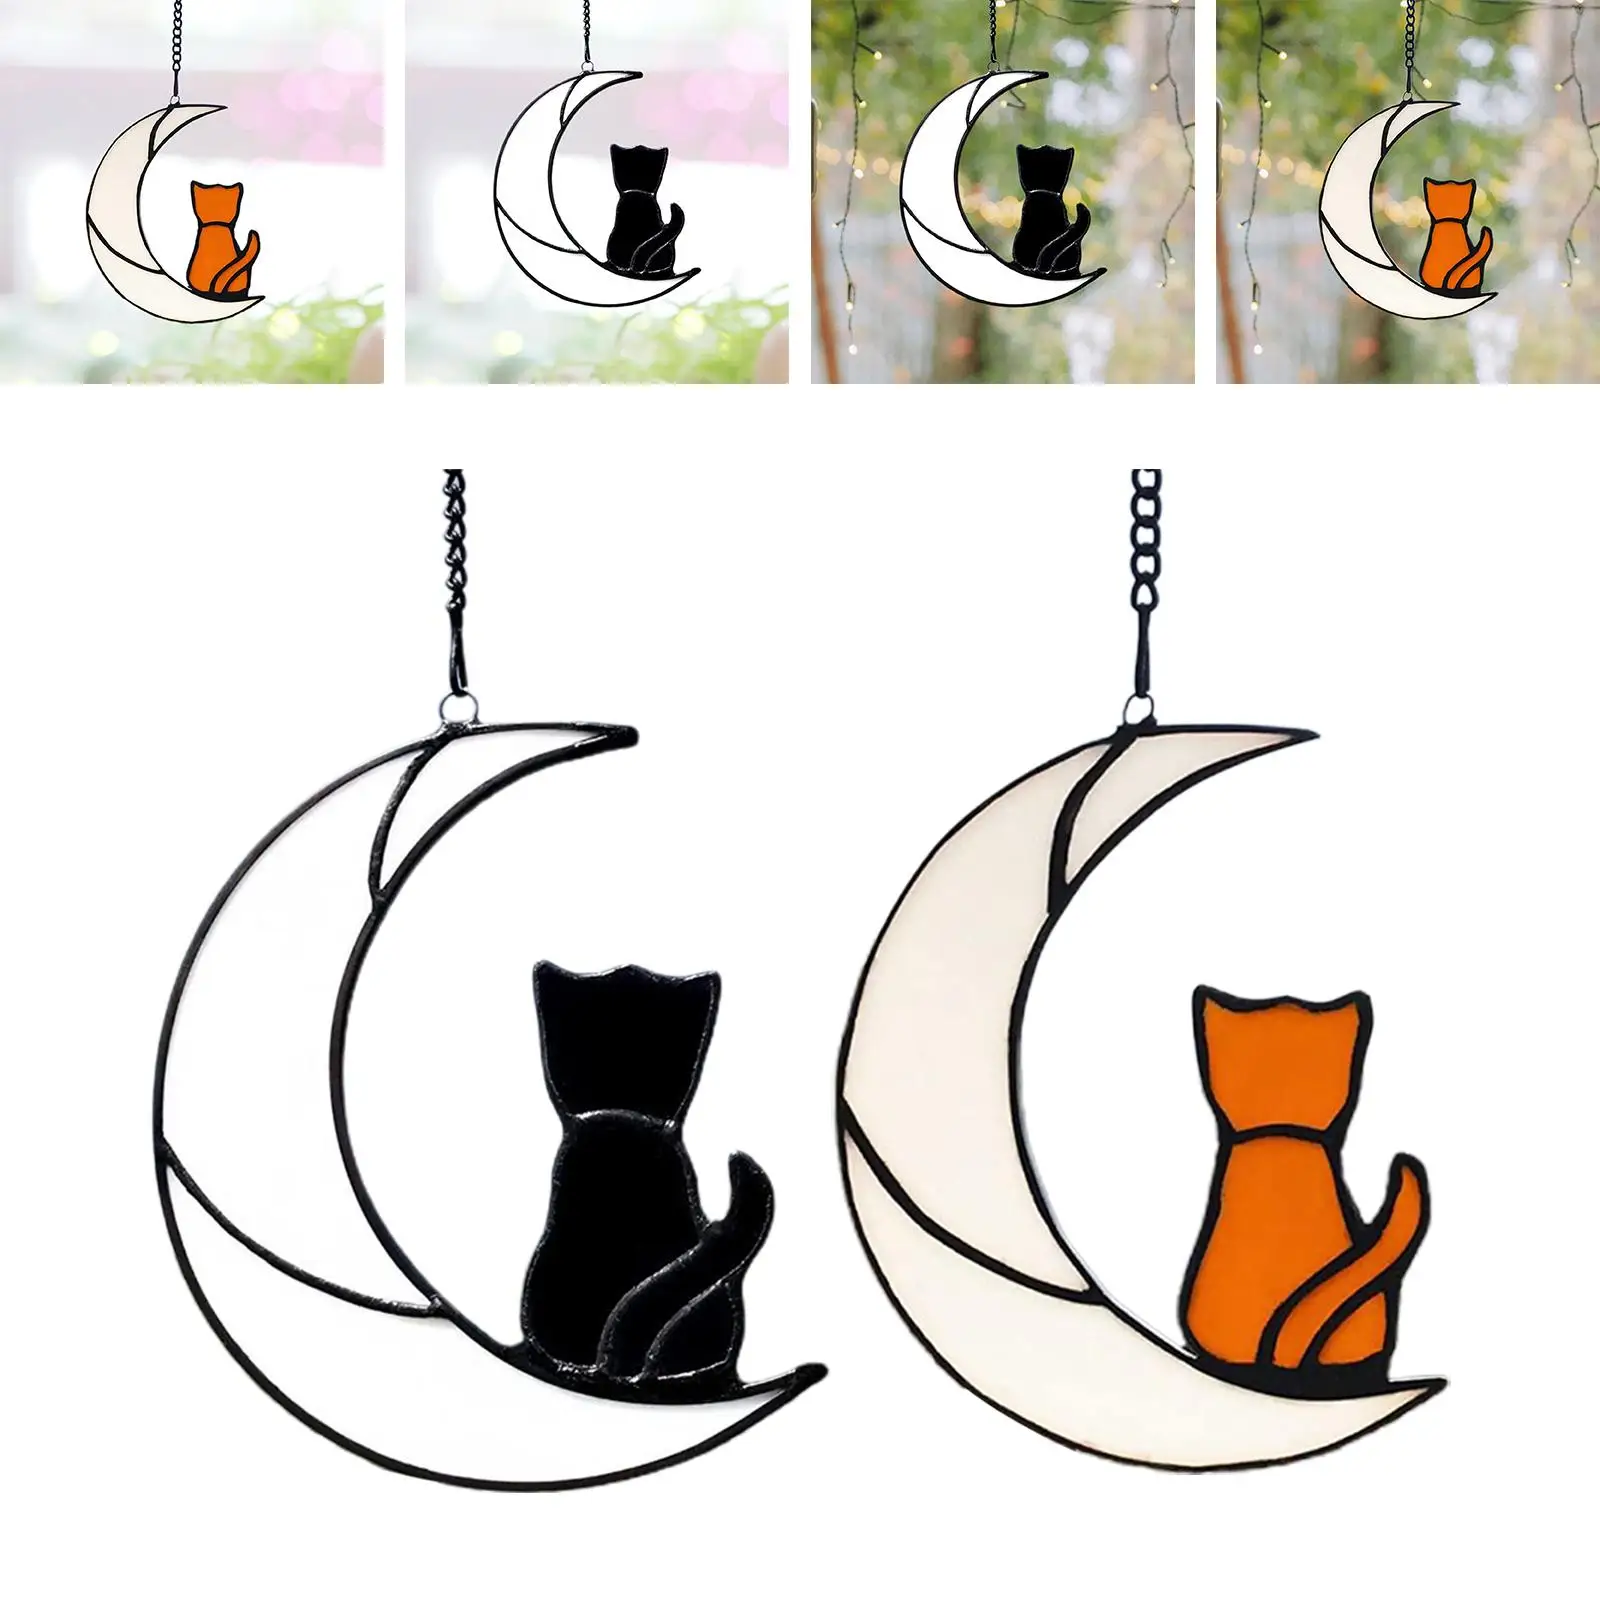 Stained Glass Window Hangings Cat on The Moon Window Hanging Ornament Decor